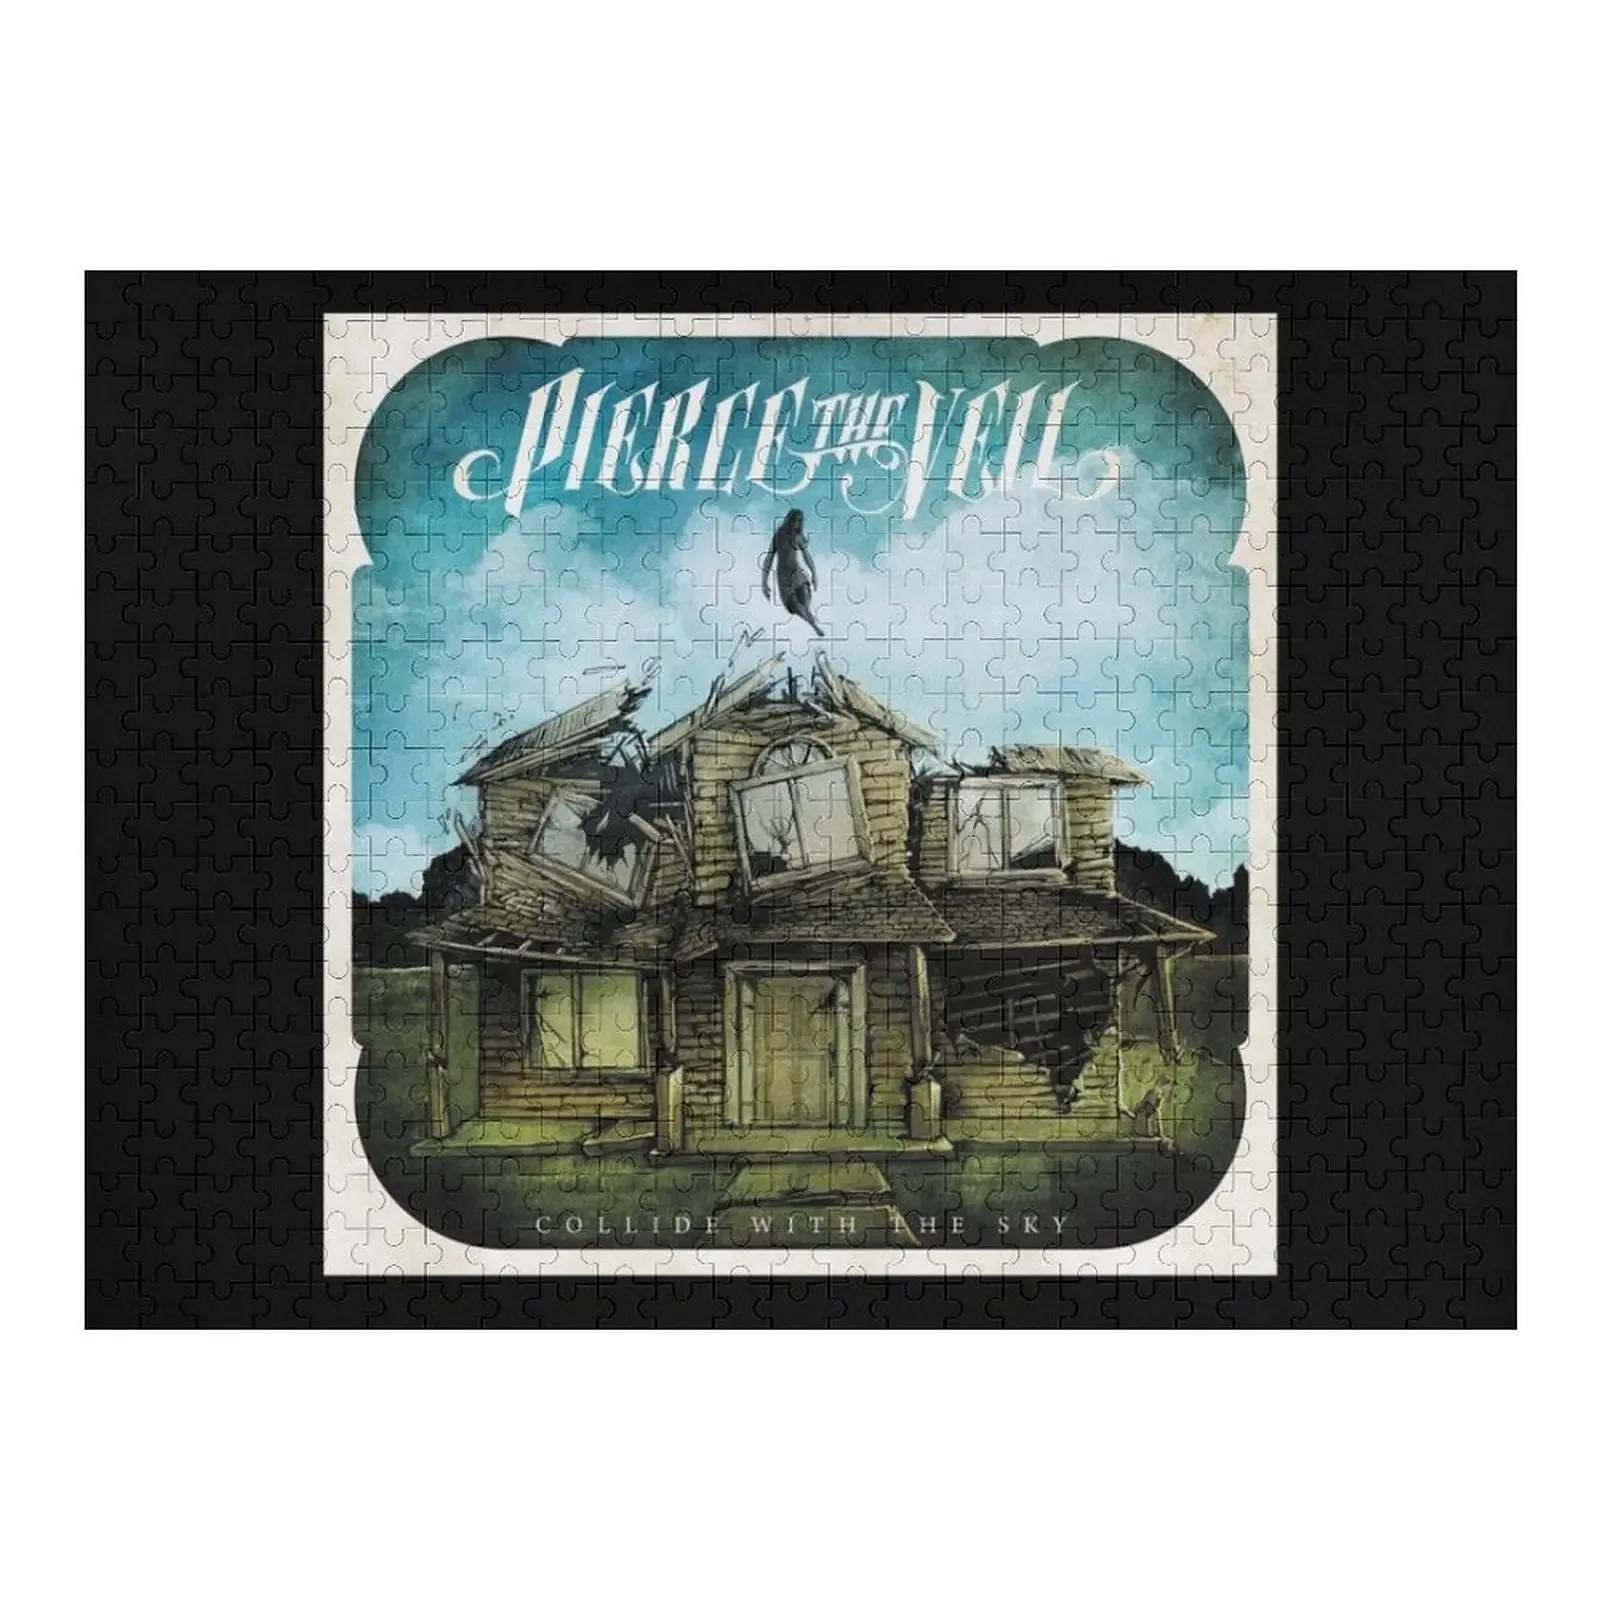 Pierce the Veil collide with the sky Jigsaw Puzzle Iq Wooden Adults Puzzle